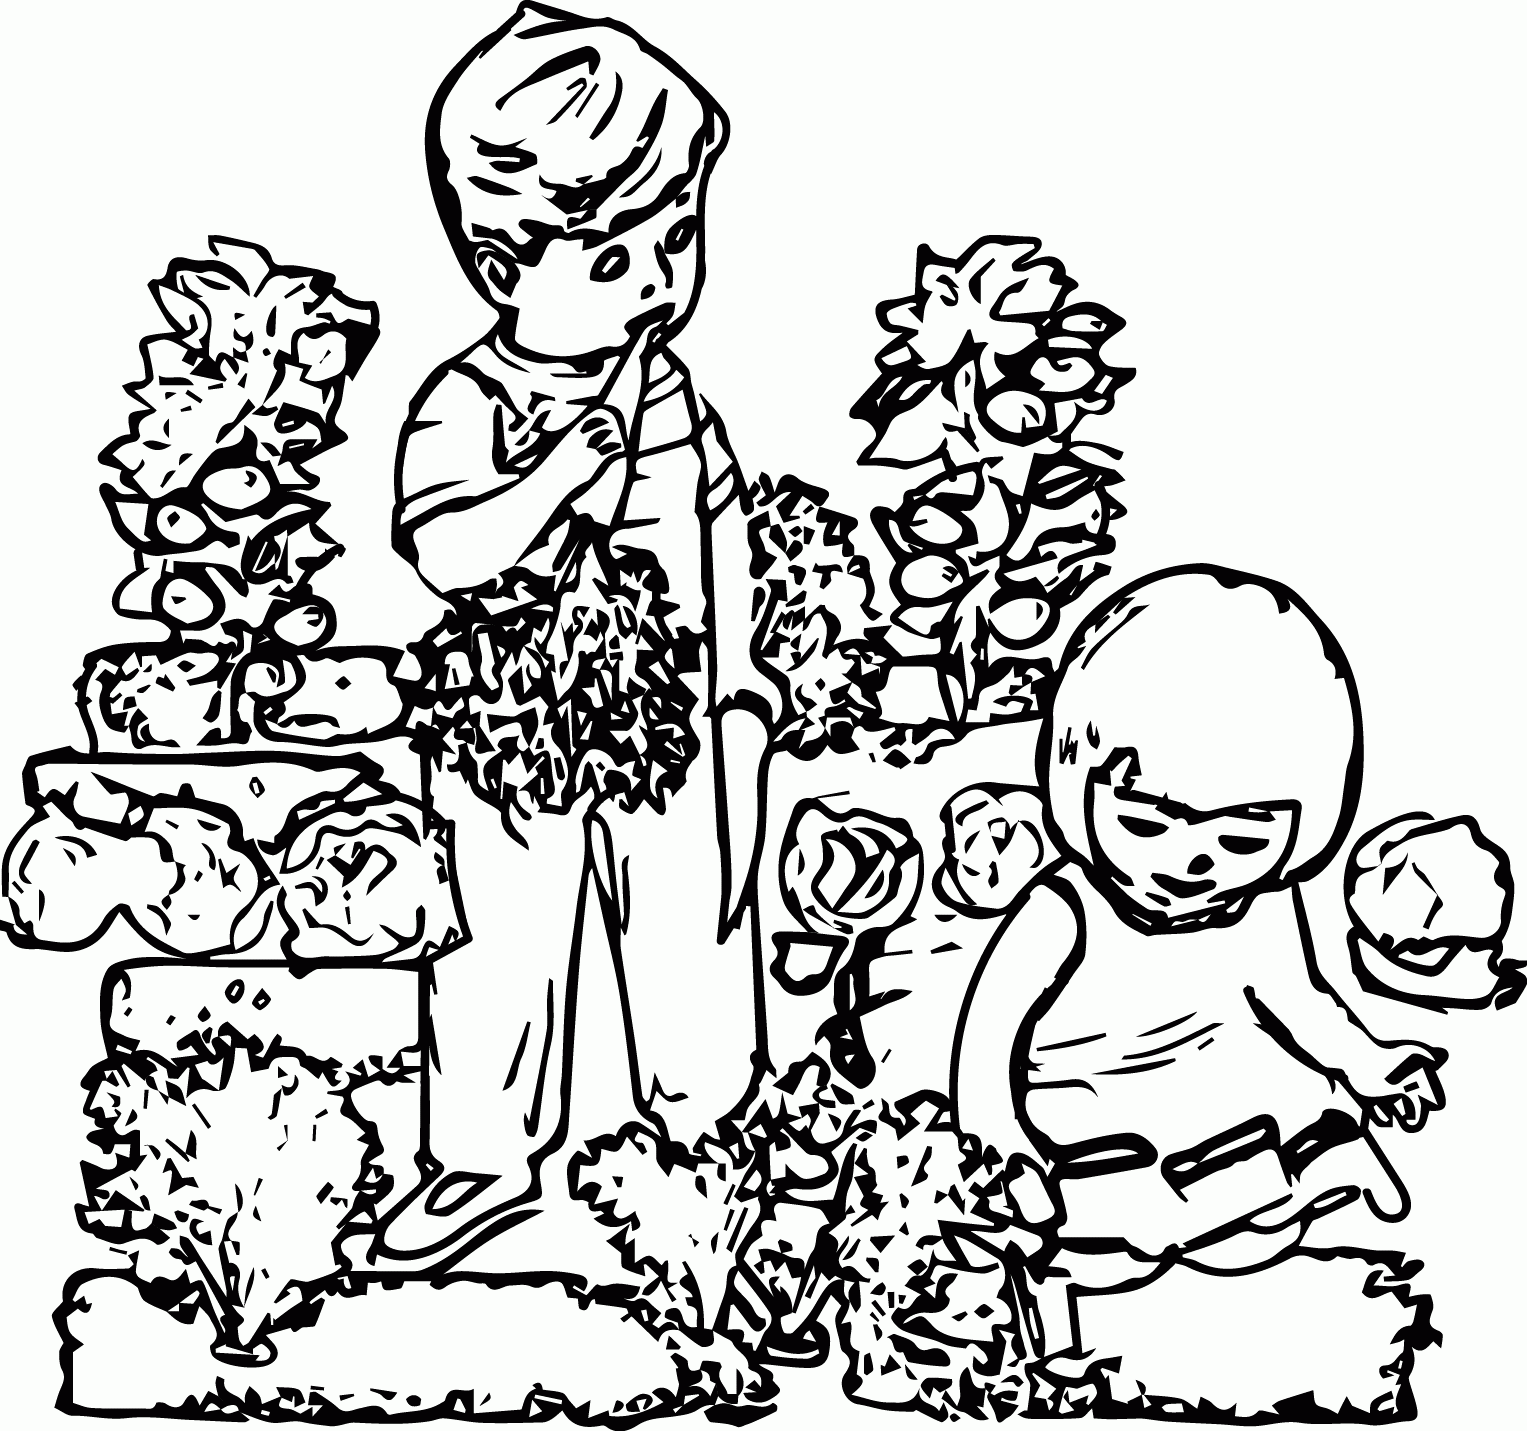 Gardening Coloring Pages For Kindergarten - High Quality Coloring ...